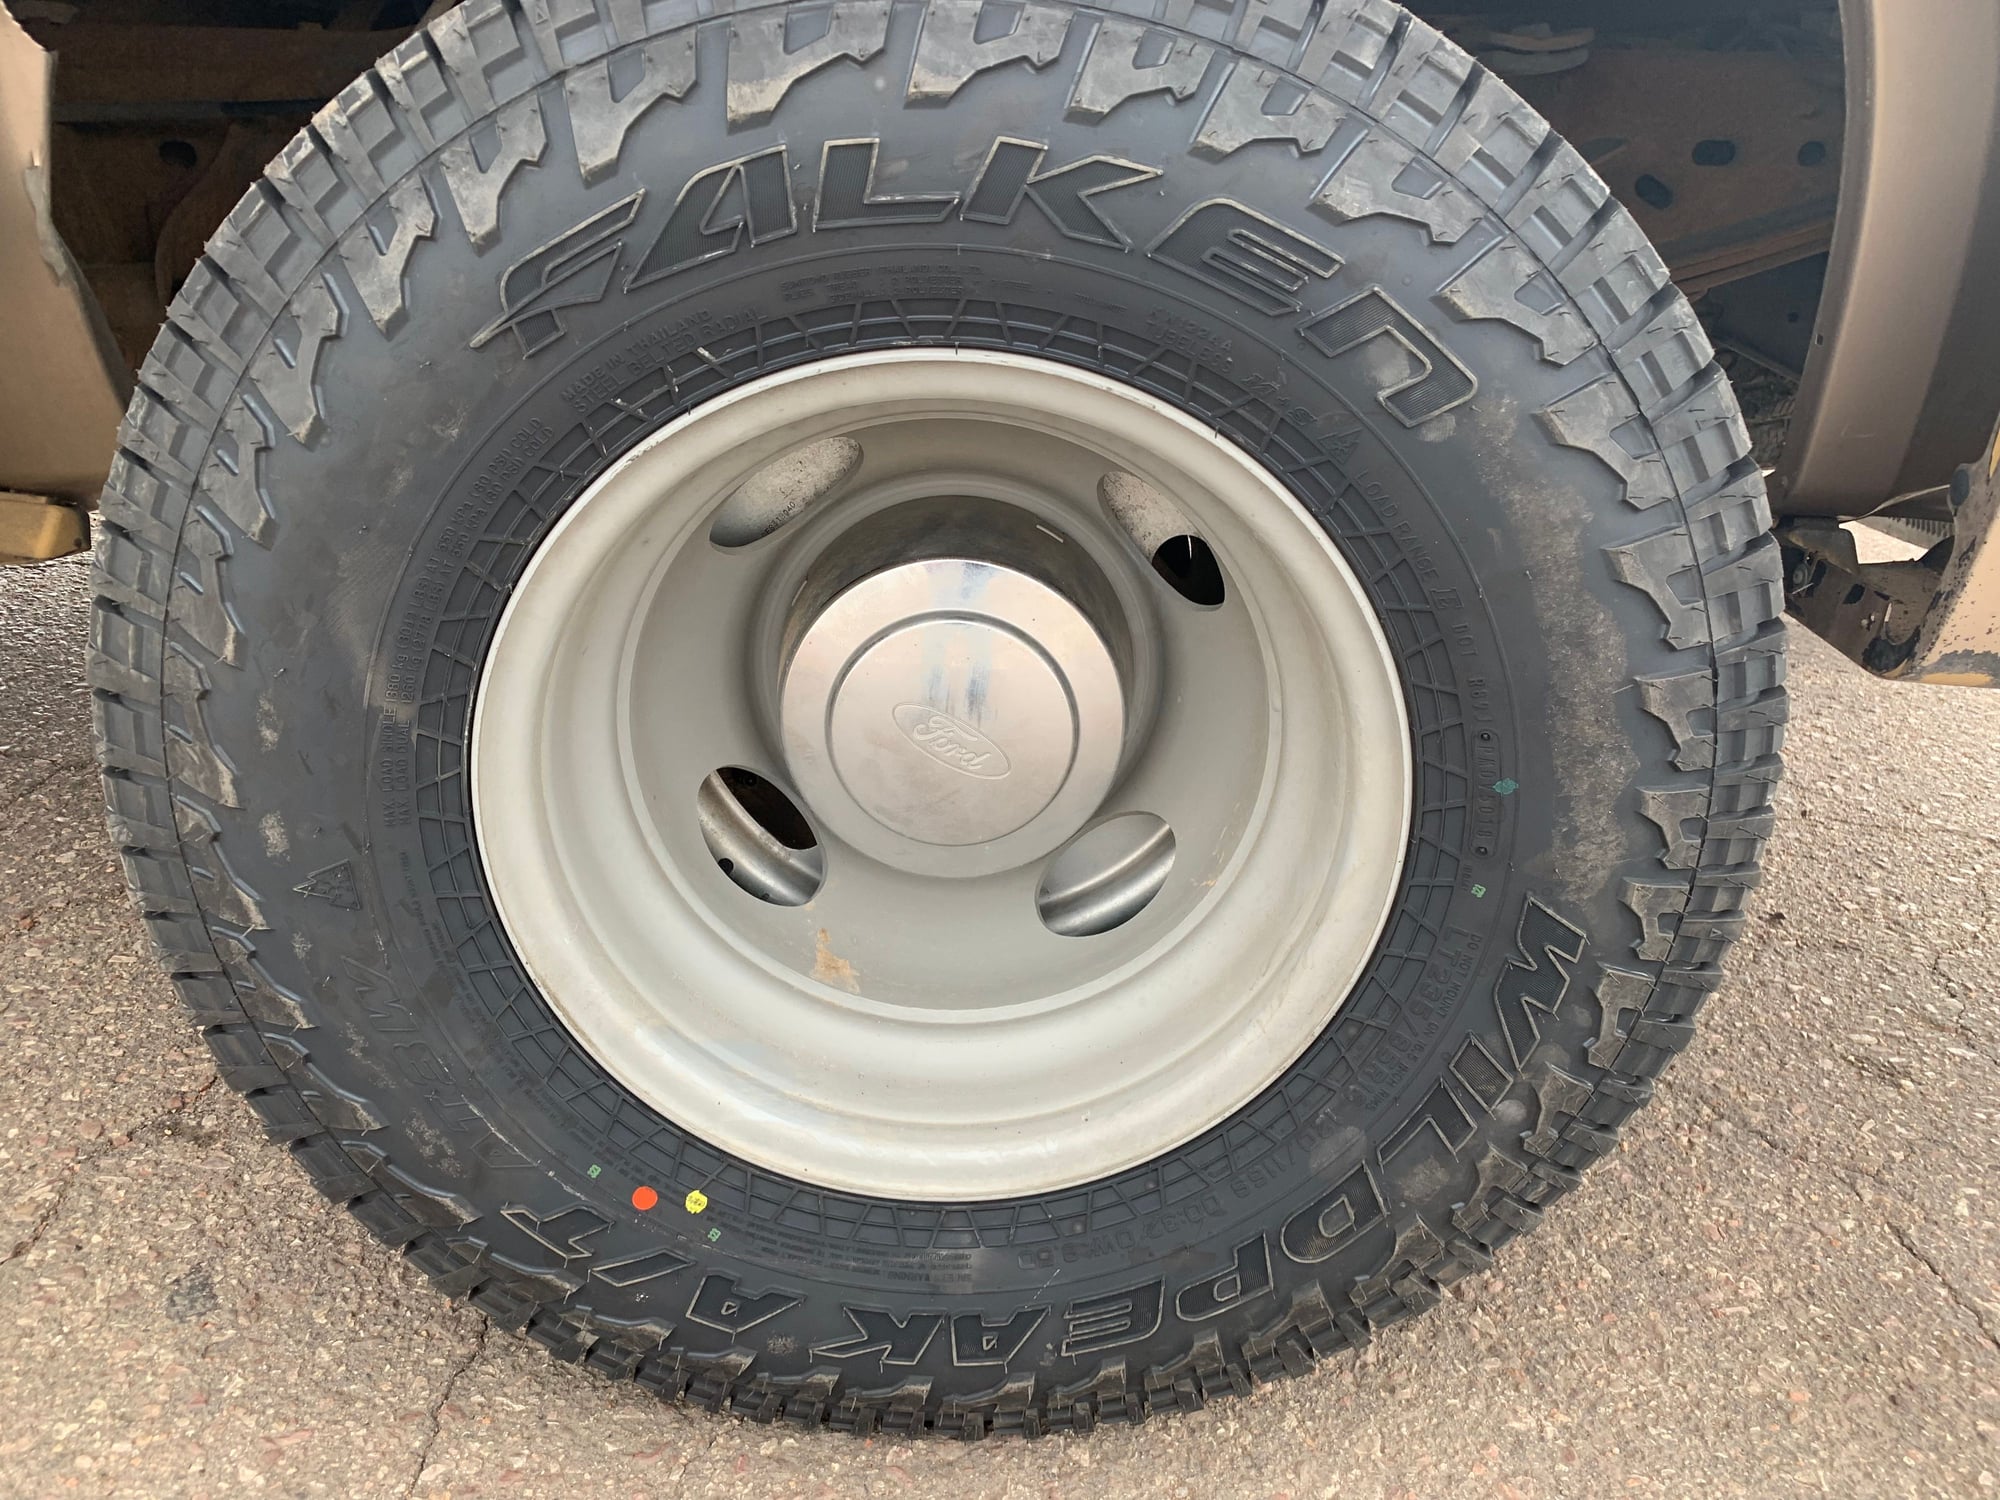 New tires installed...Falken Wildpeak AT3/W - Ford Truck Enthusiasts Forums